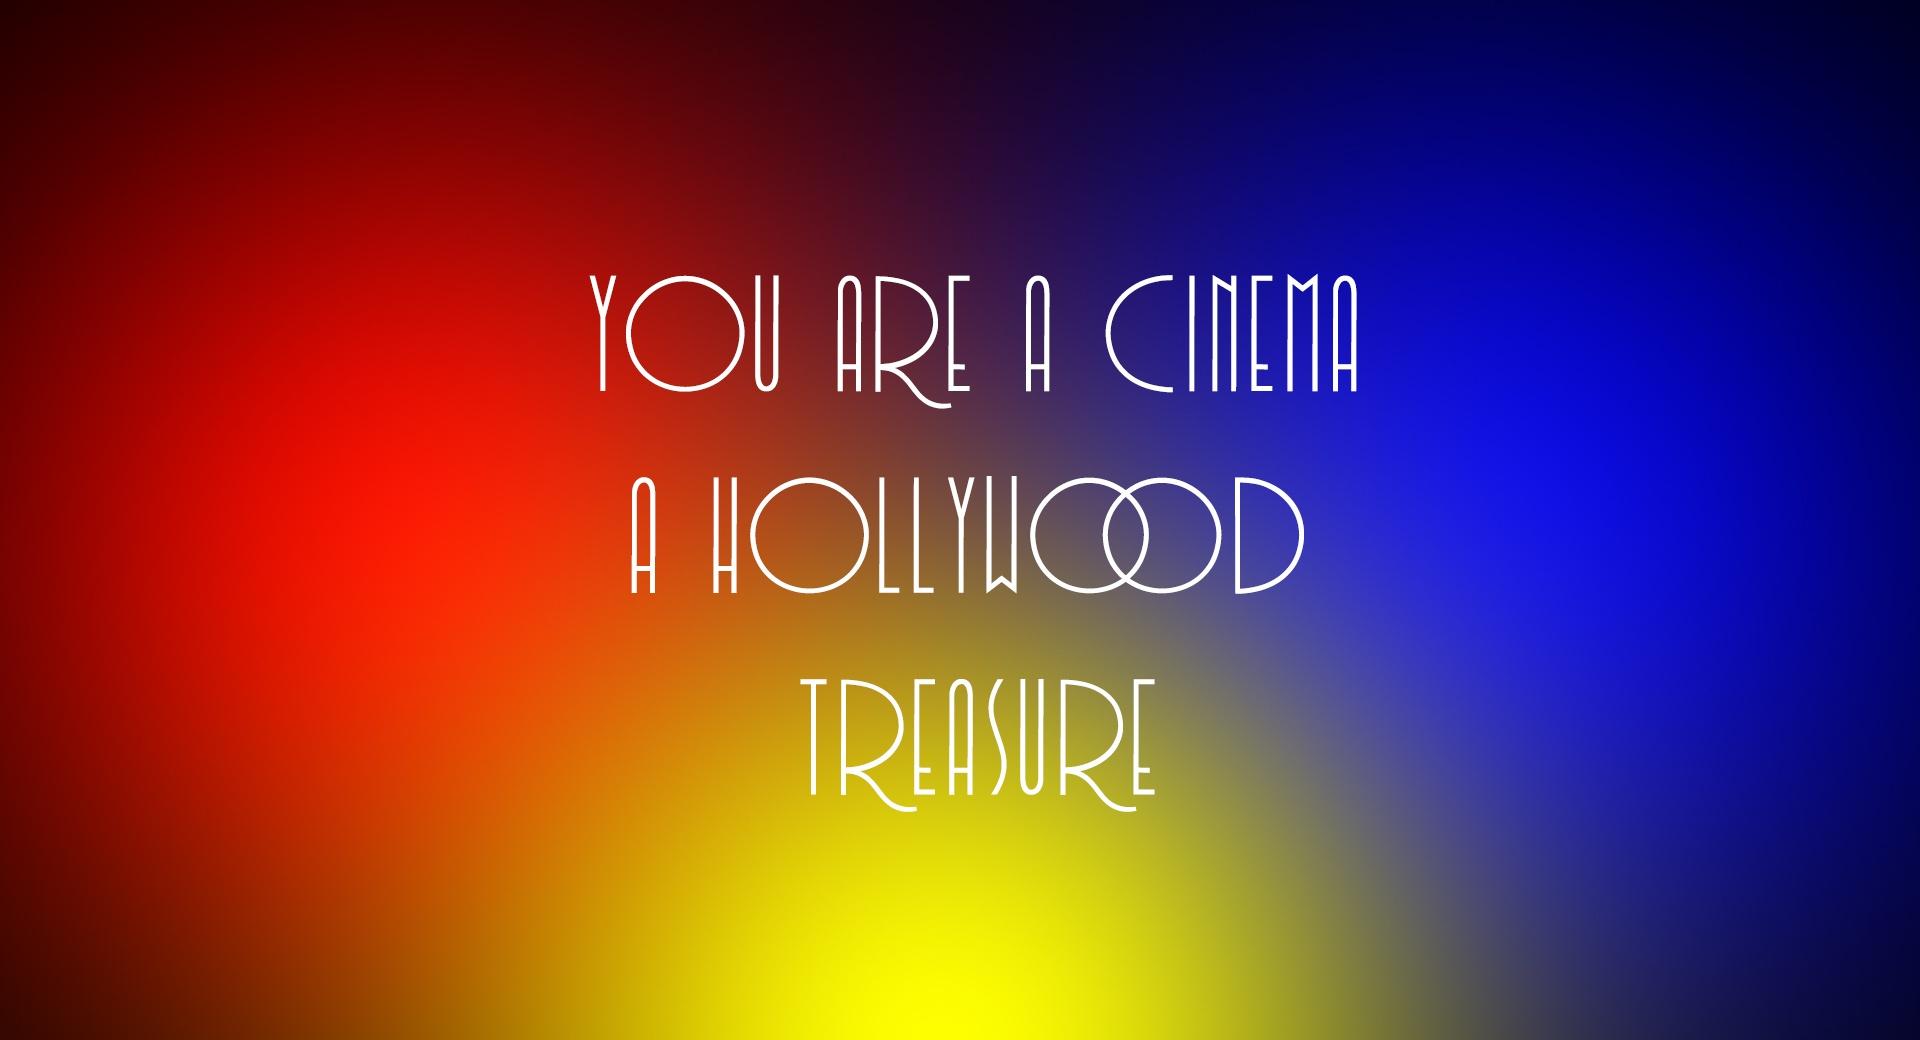 A Hollywood Treasure wallpapers HD quality